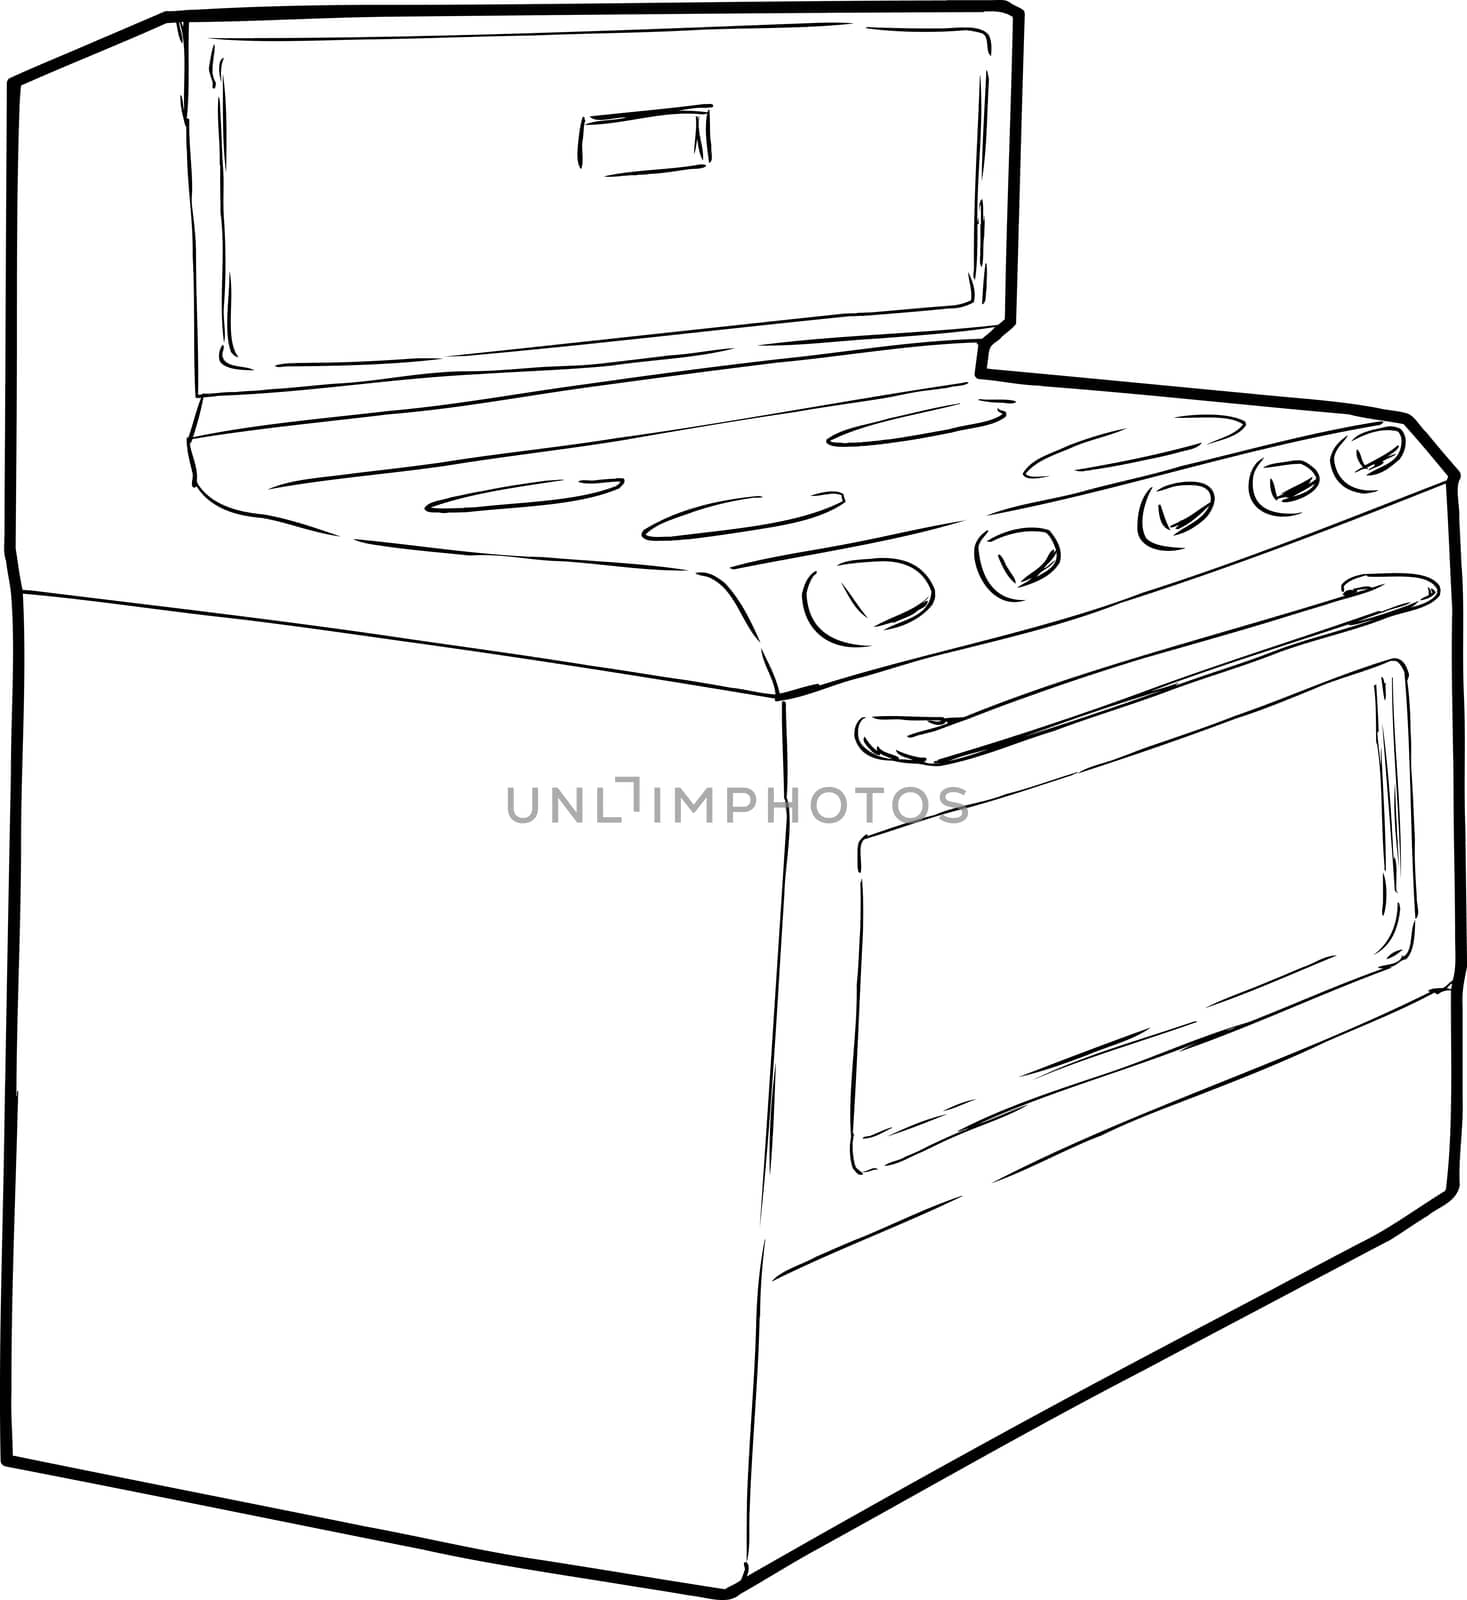 Outine sketch of generic isolated white induction stove